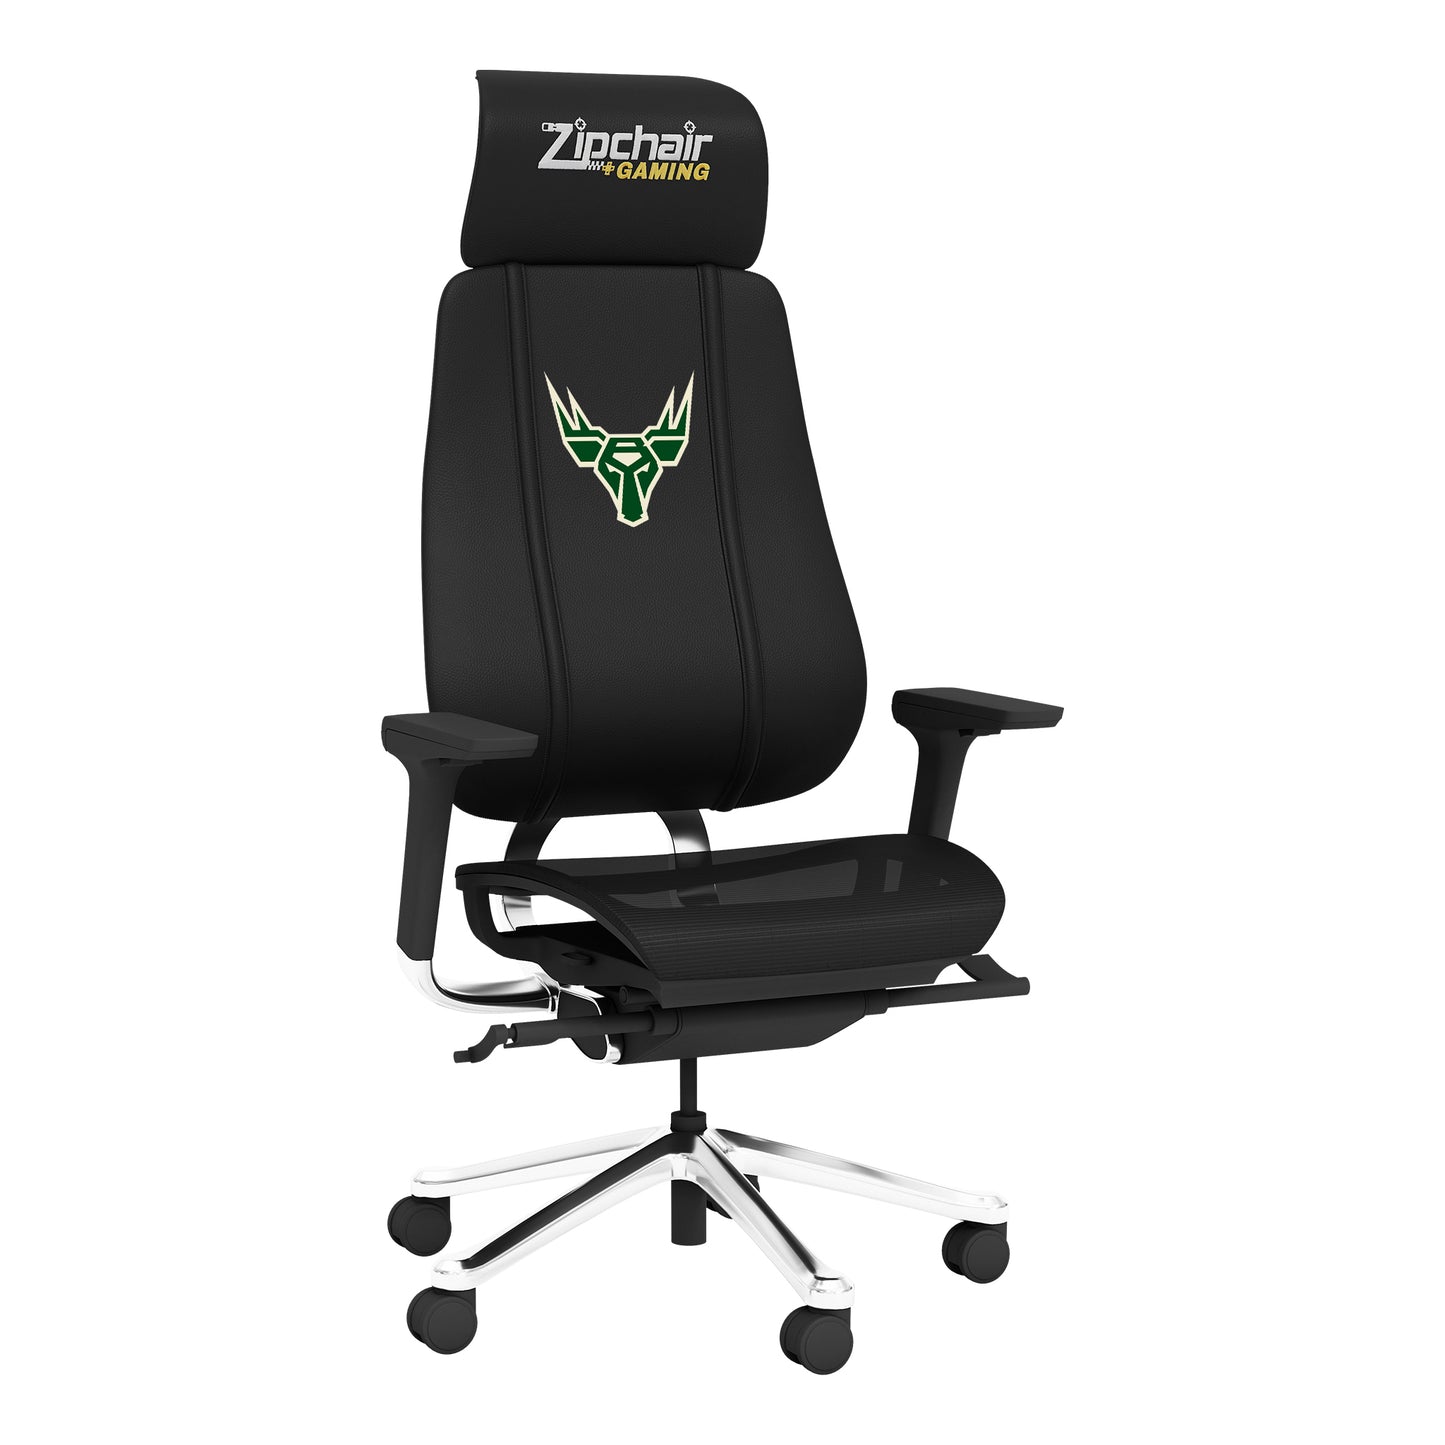 PhantomX Mesh Gaming Chair with Bucks Gaming Primary Logo [Can Only Be Shipped to Wisconsin]